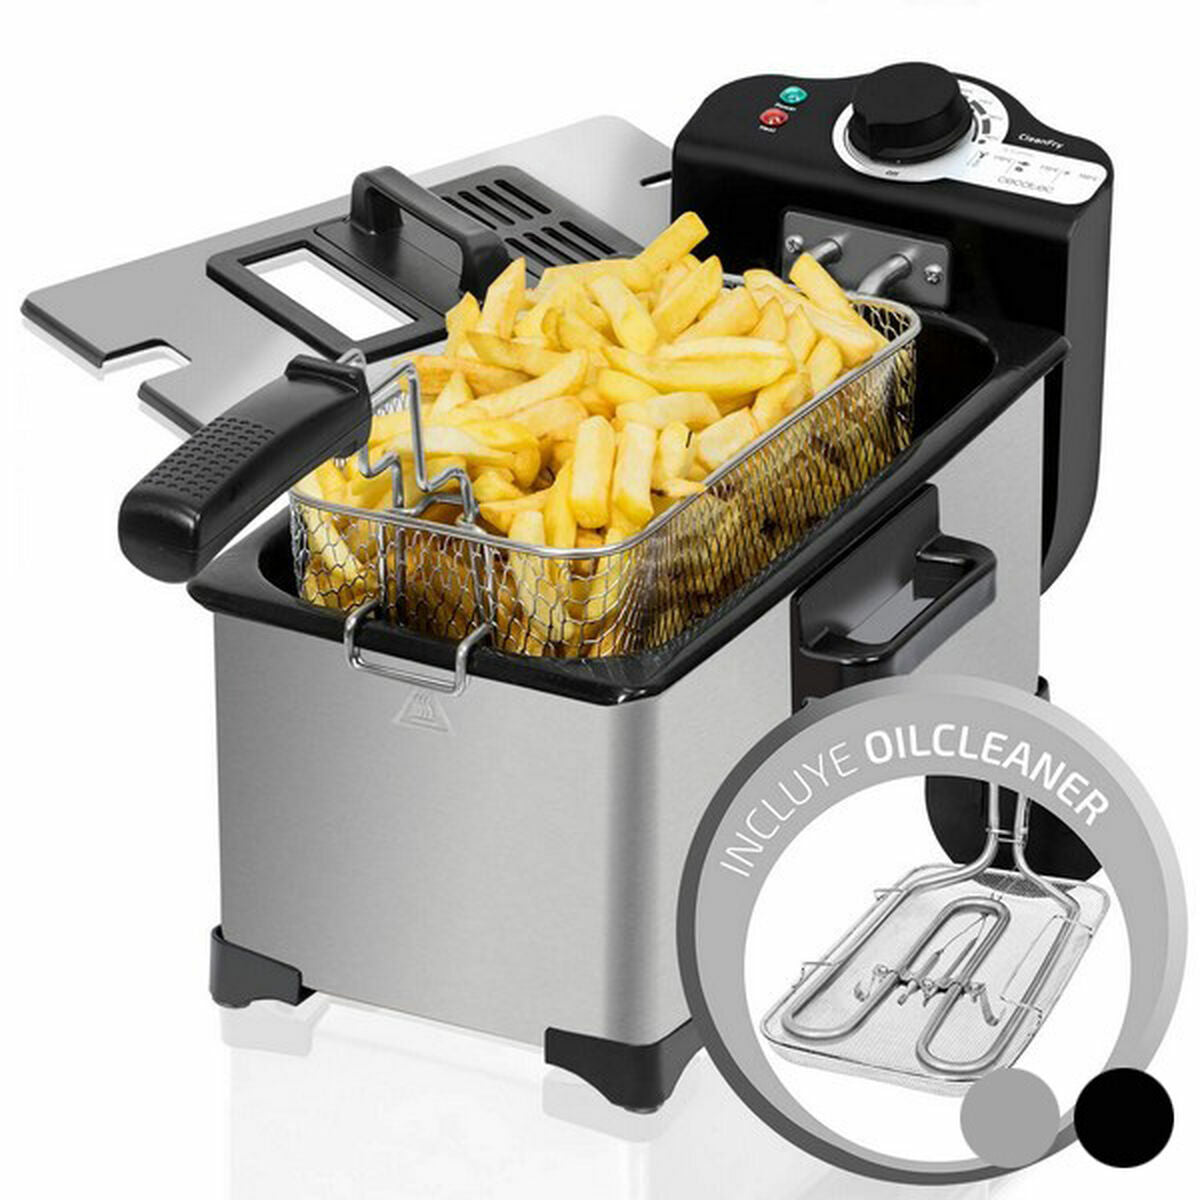 Fritteuse Cecotec Cleanfry 3 L 2000W - CA International 